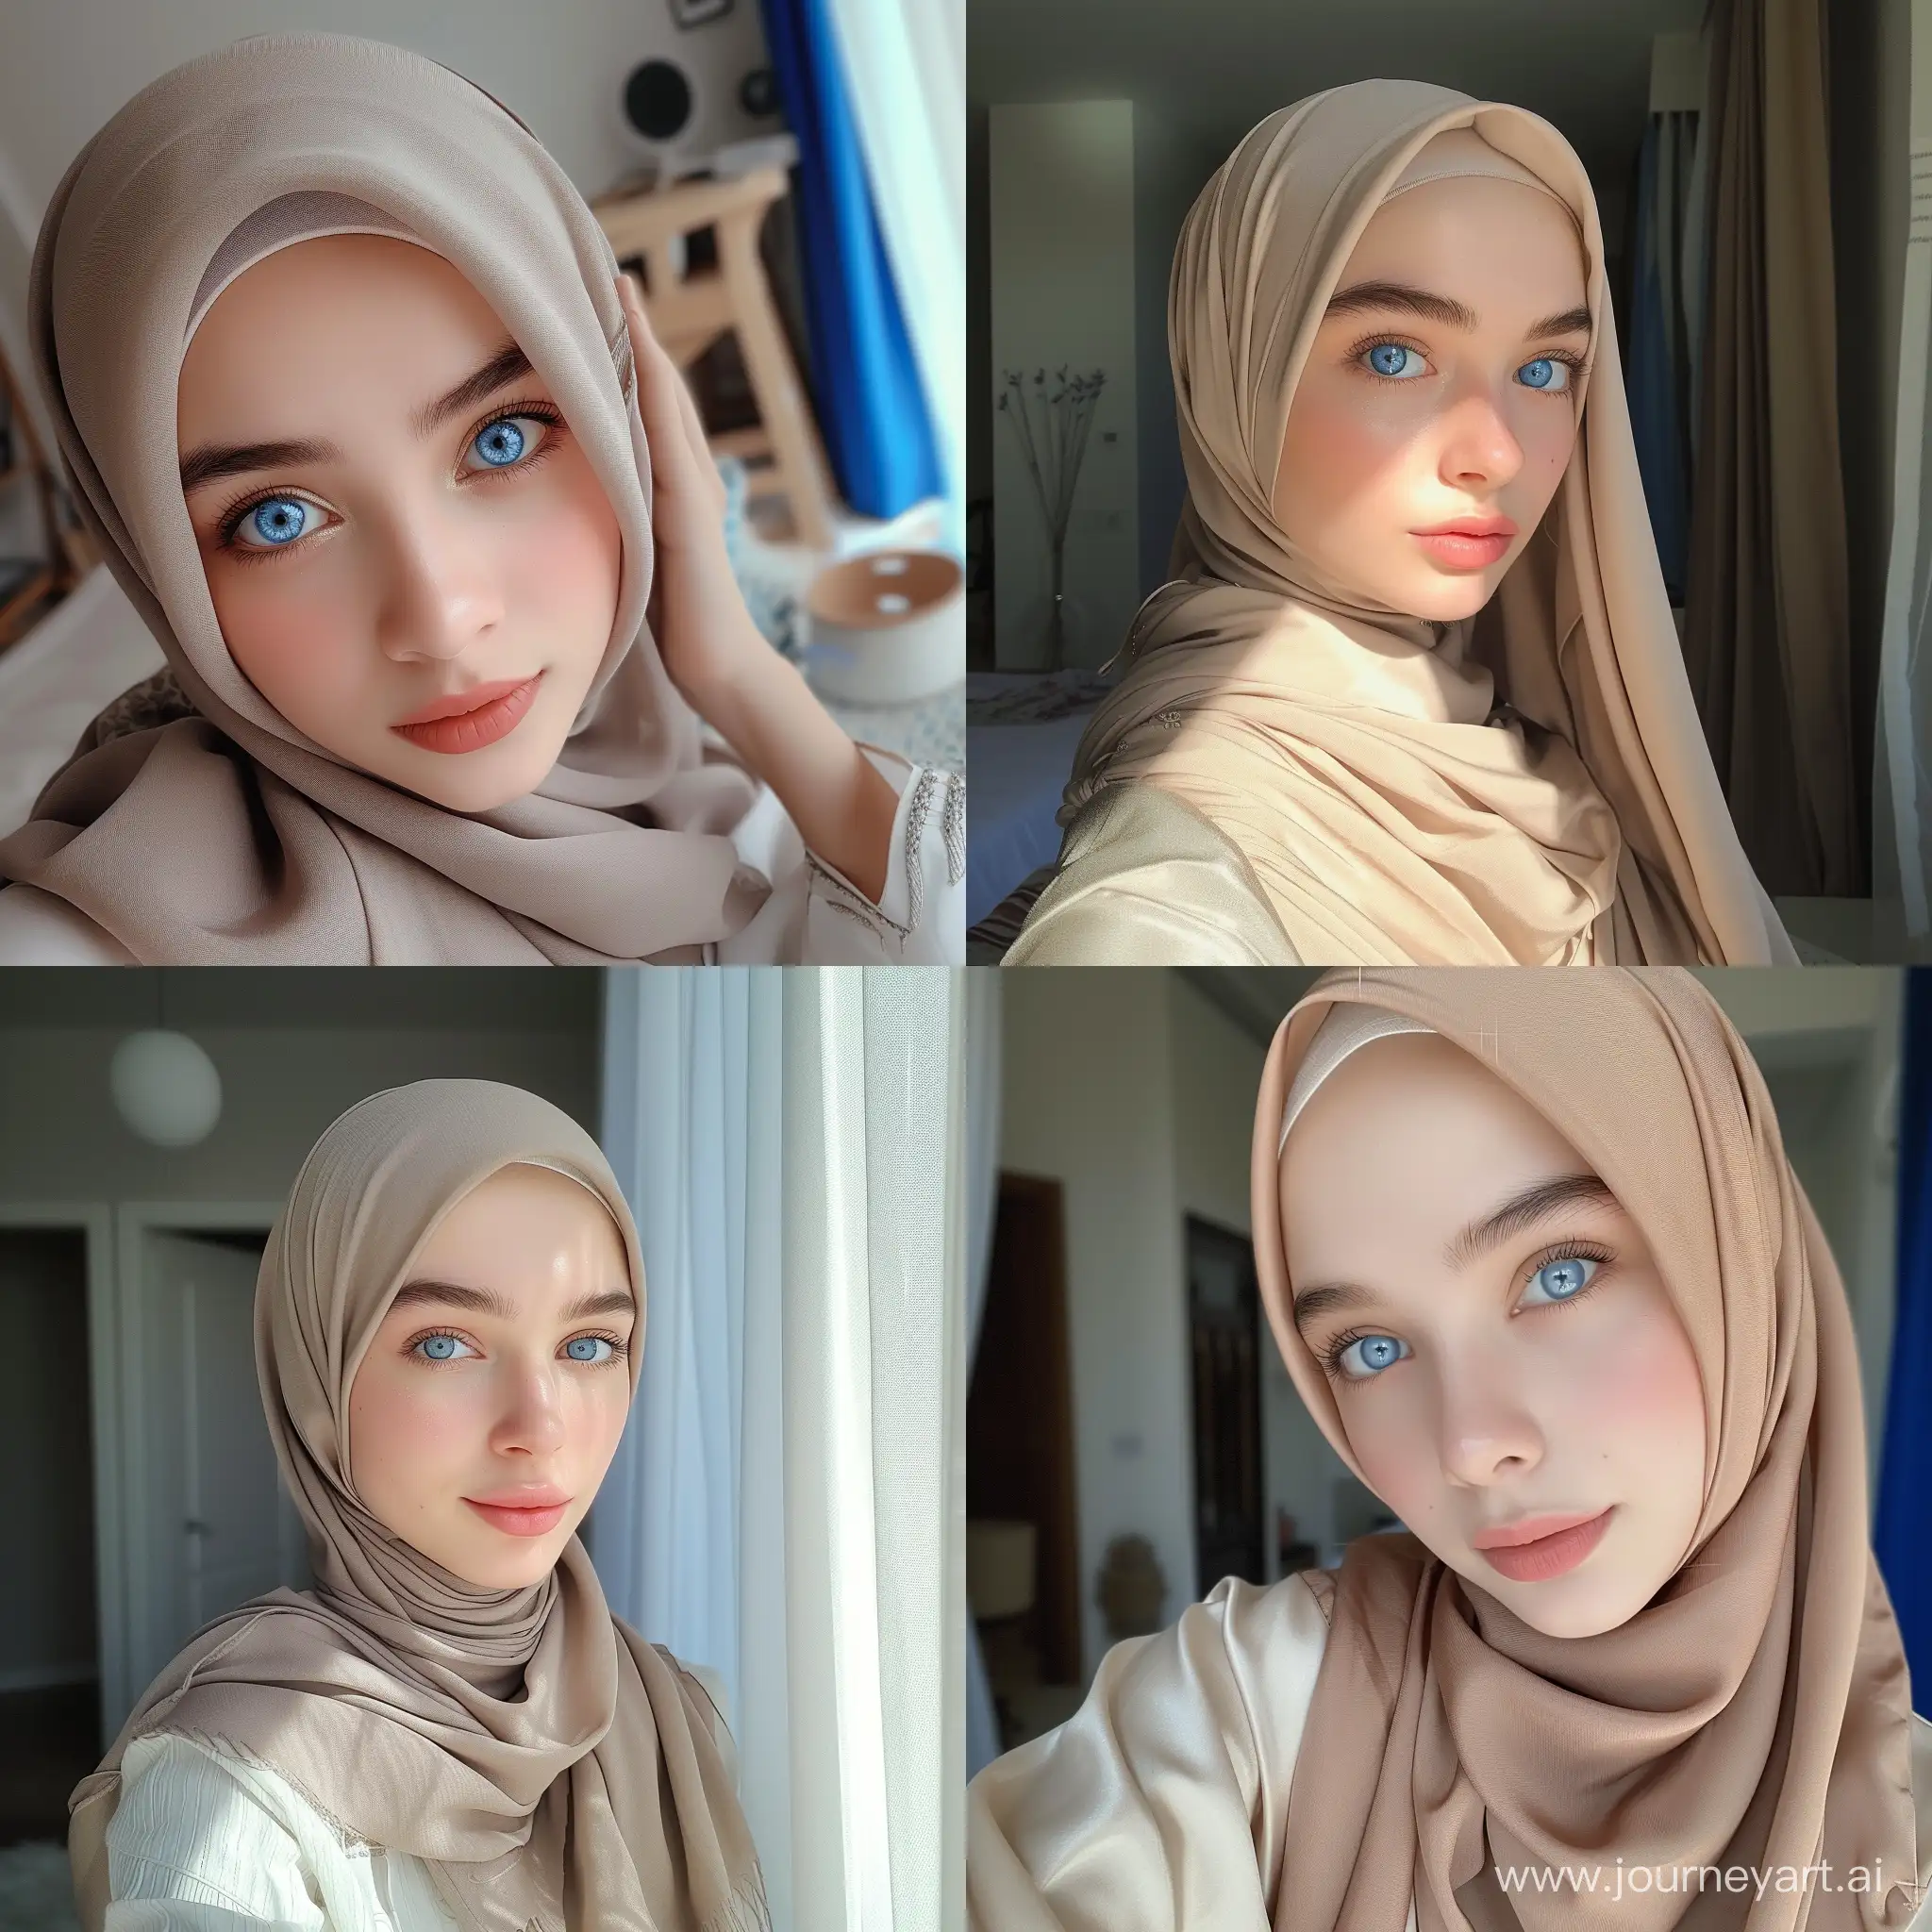 Captivating-Muslim-Woman-with-Blue-Eyes-in-Elegant-Hijab-and-Warm-Expression